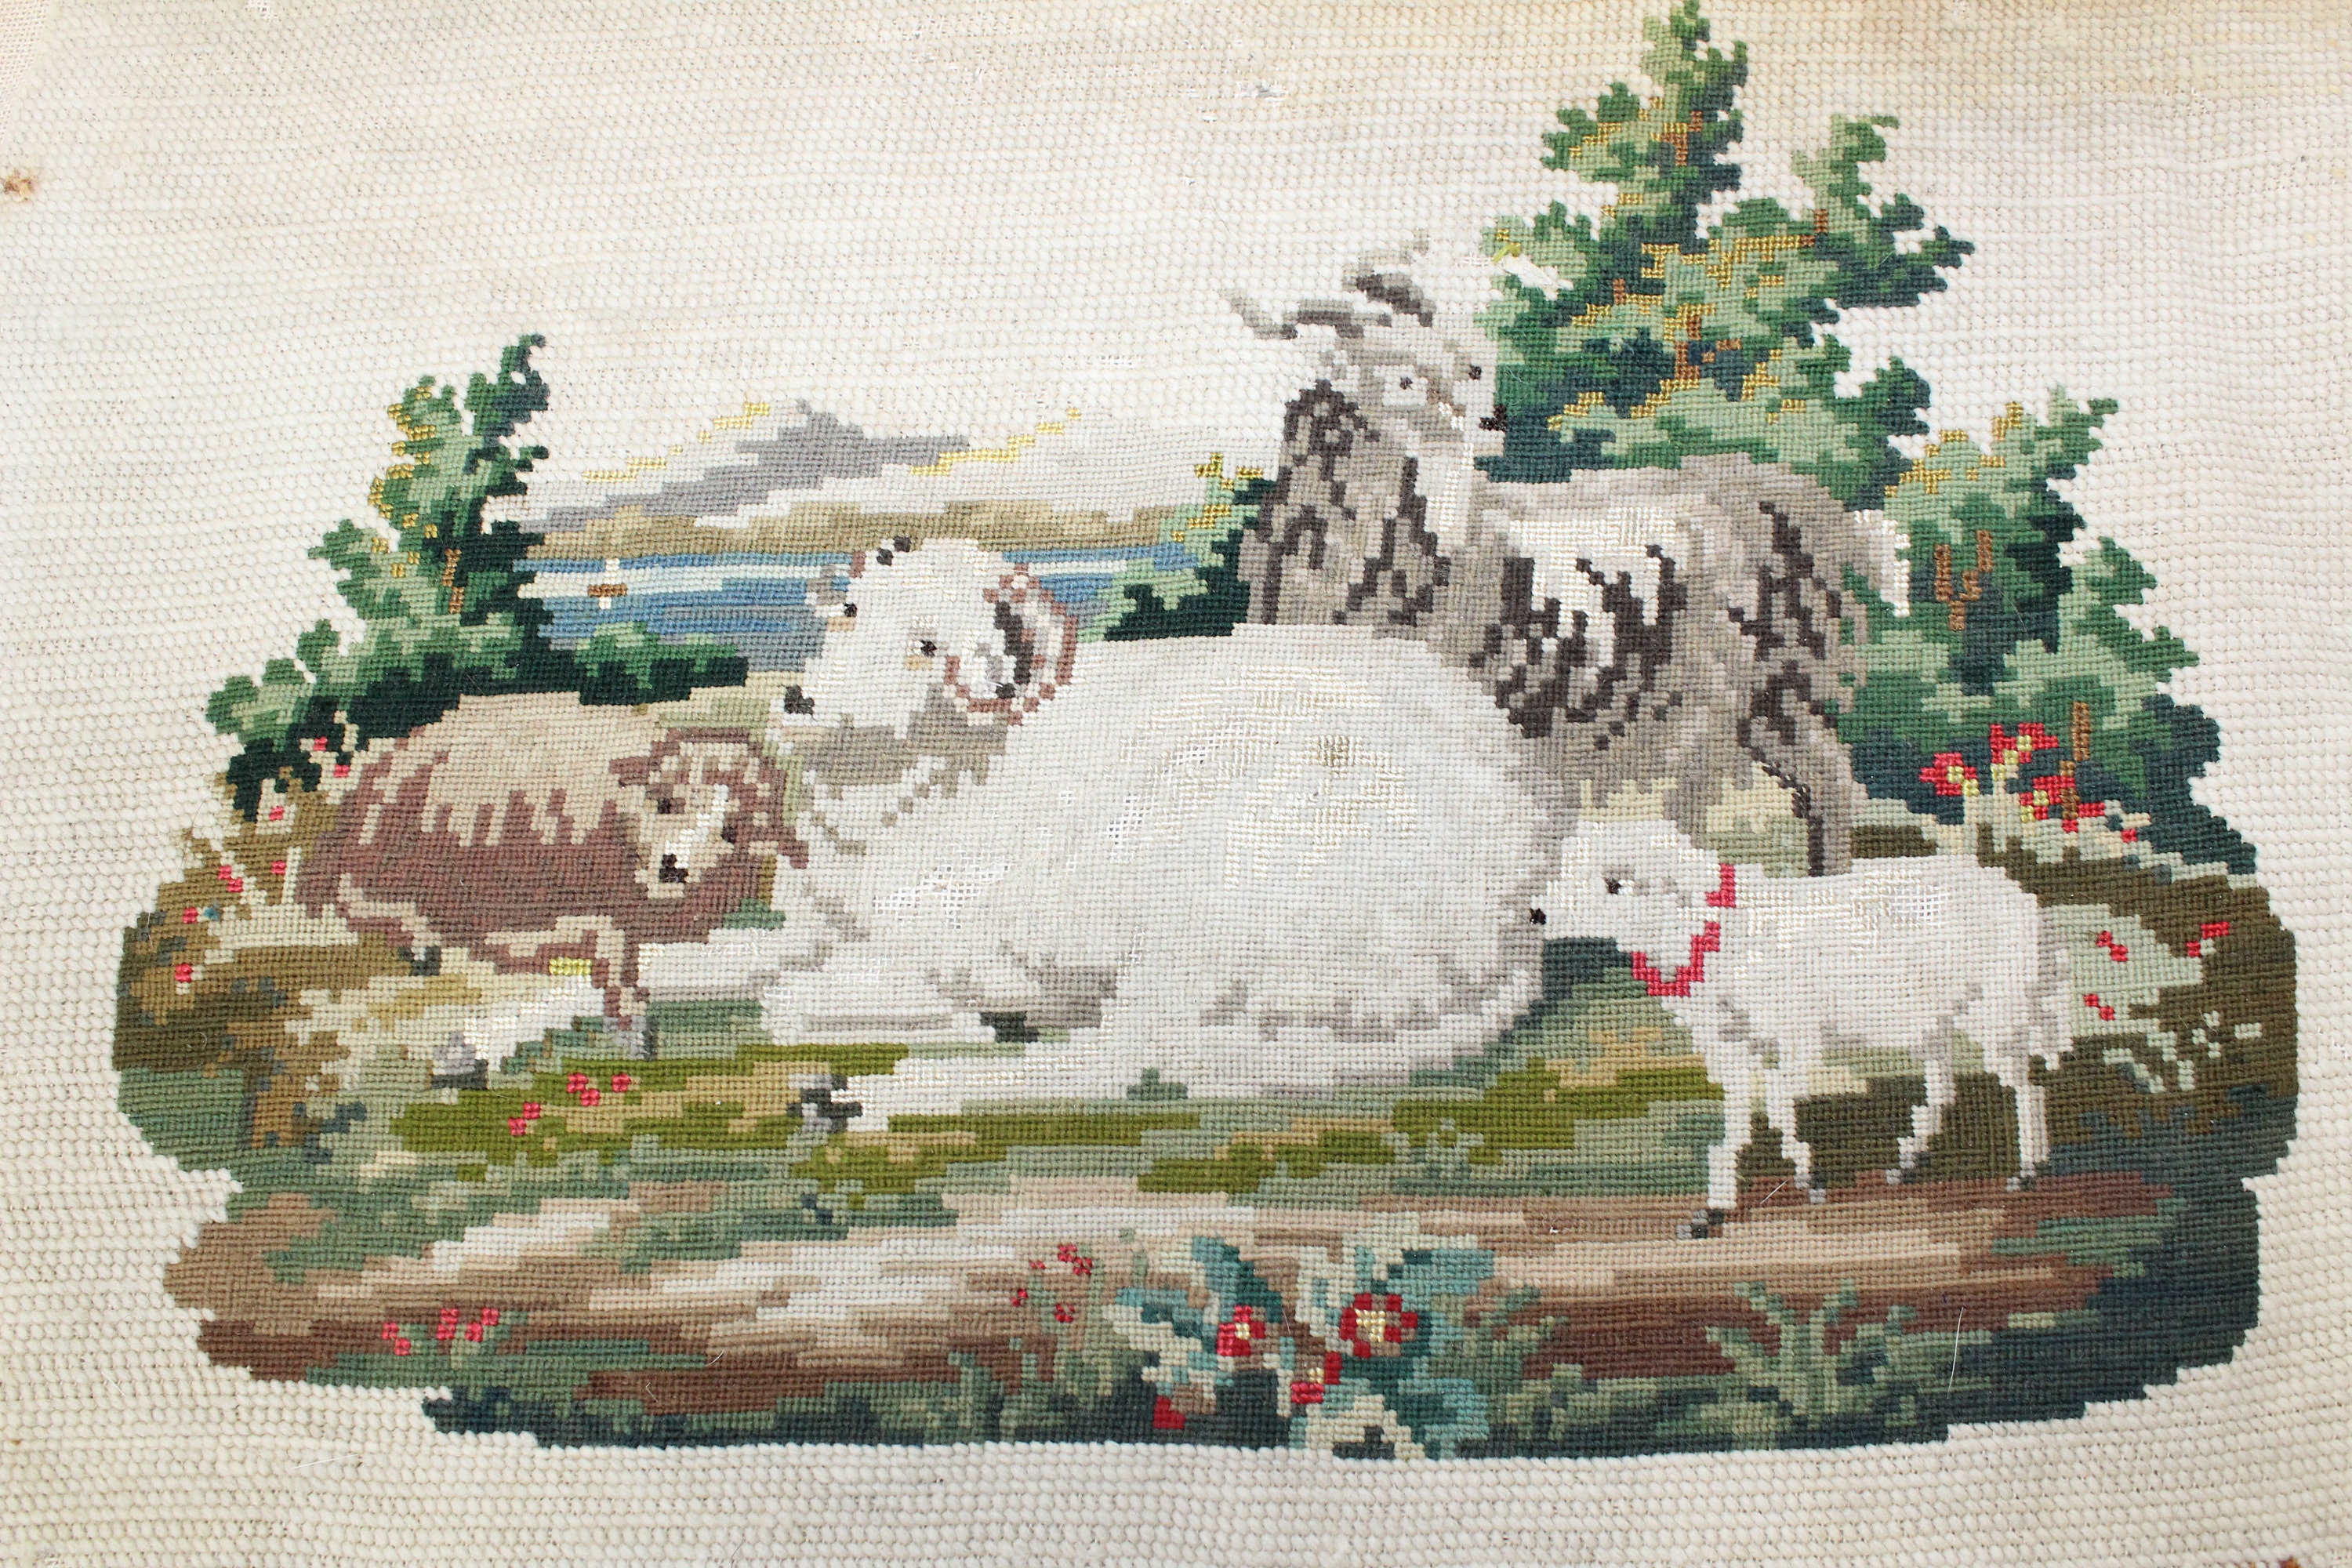 Antique Victorian Tapestry Needlework Woolwork Sheep With Lambs & Ram Needlepoint Panel Well Worn